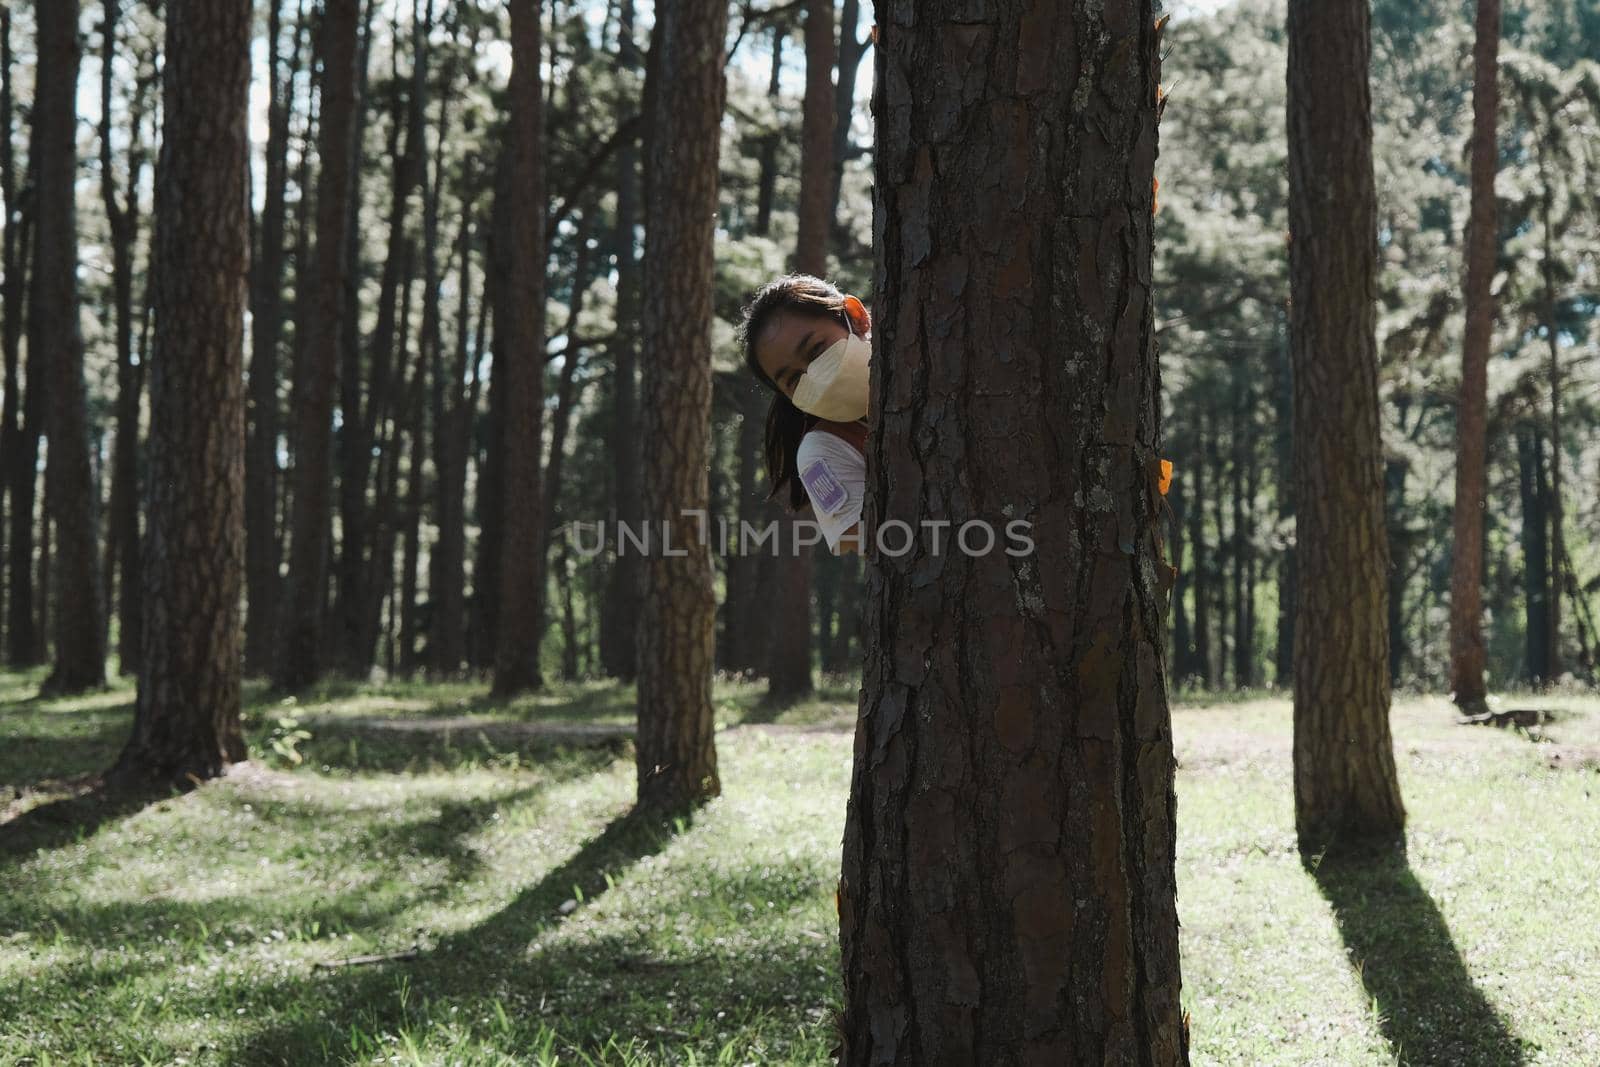 Smiling woman in mask peeking out from behind tree in a park. Happy woman hiding behind a tree in a summer day. Love nature concept.